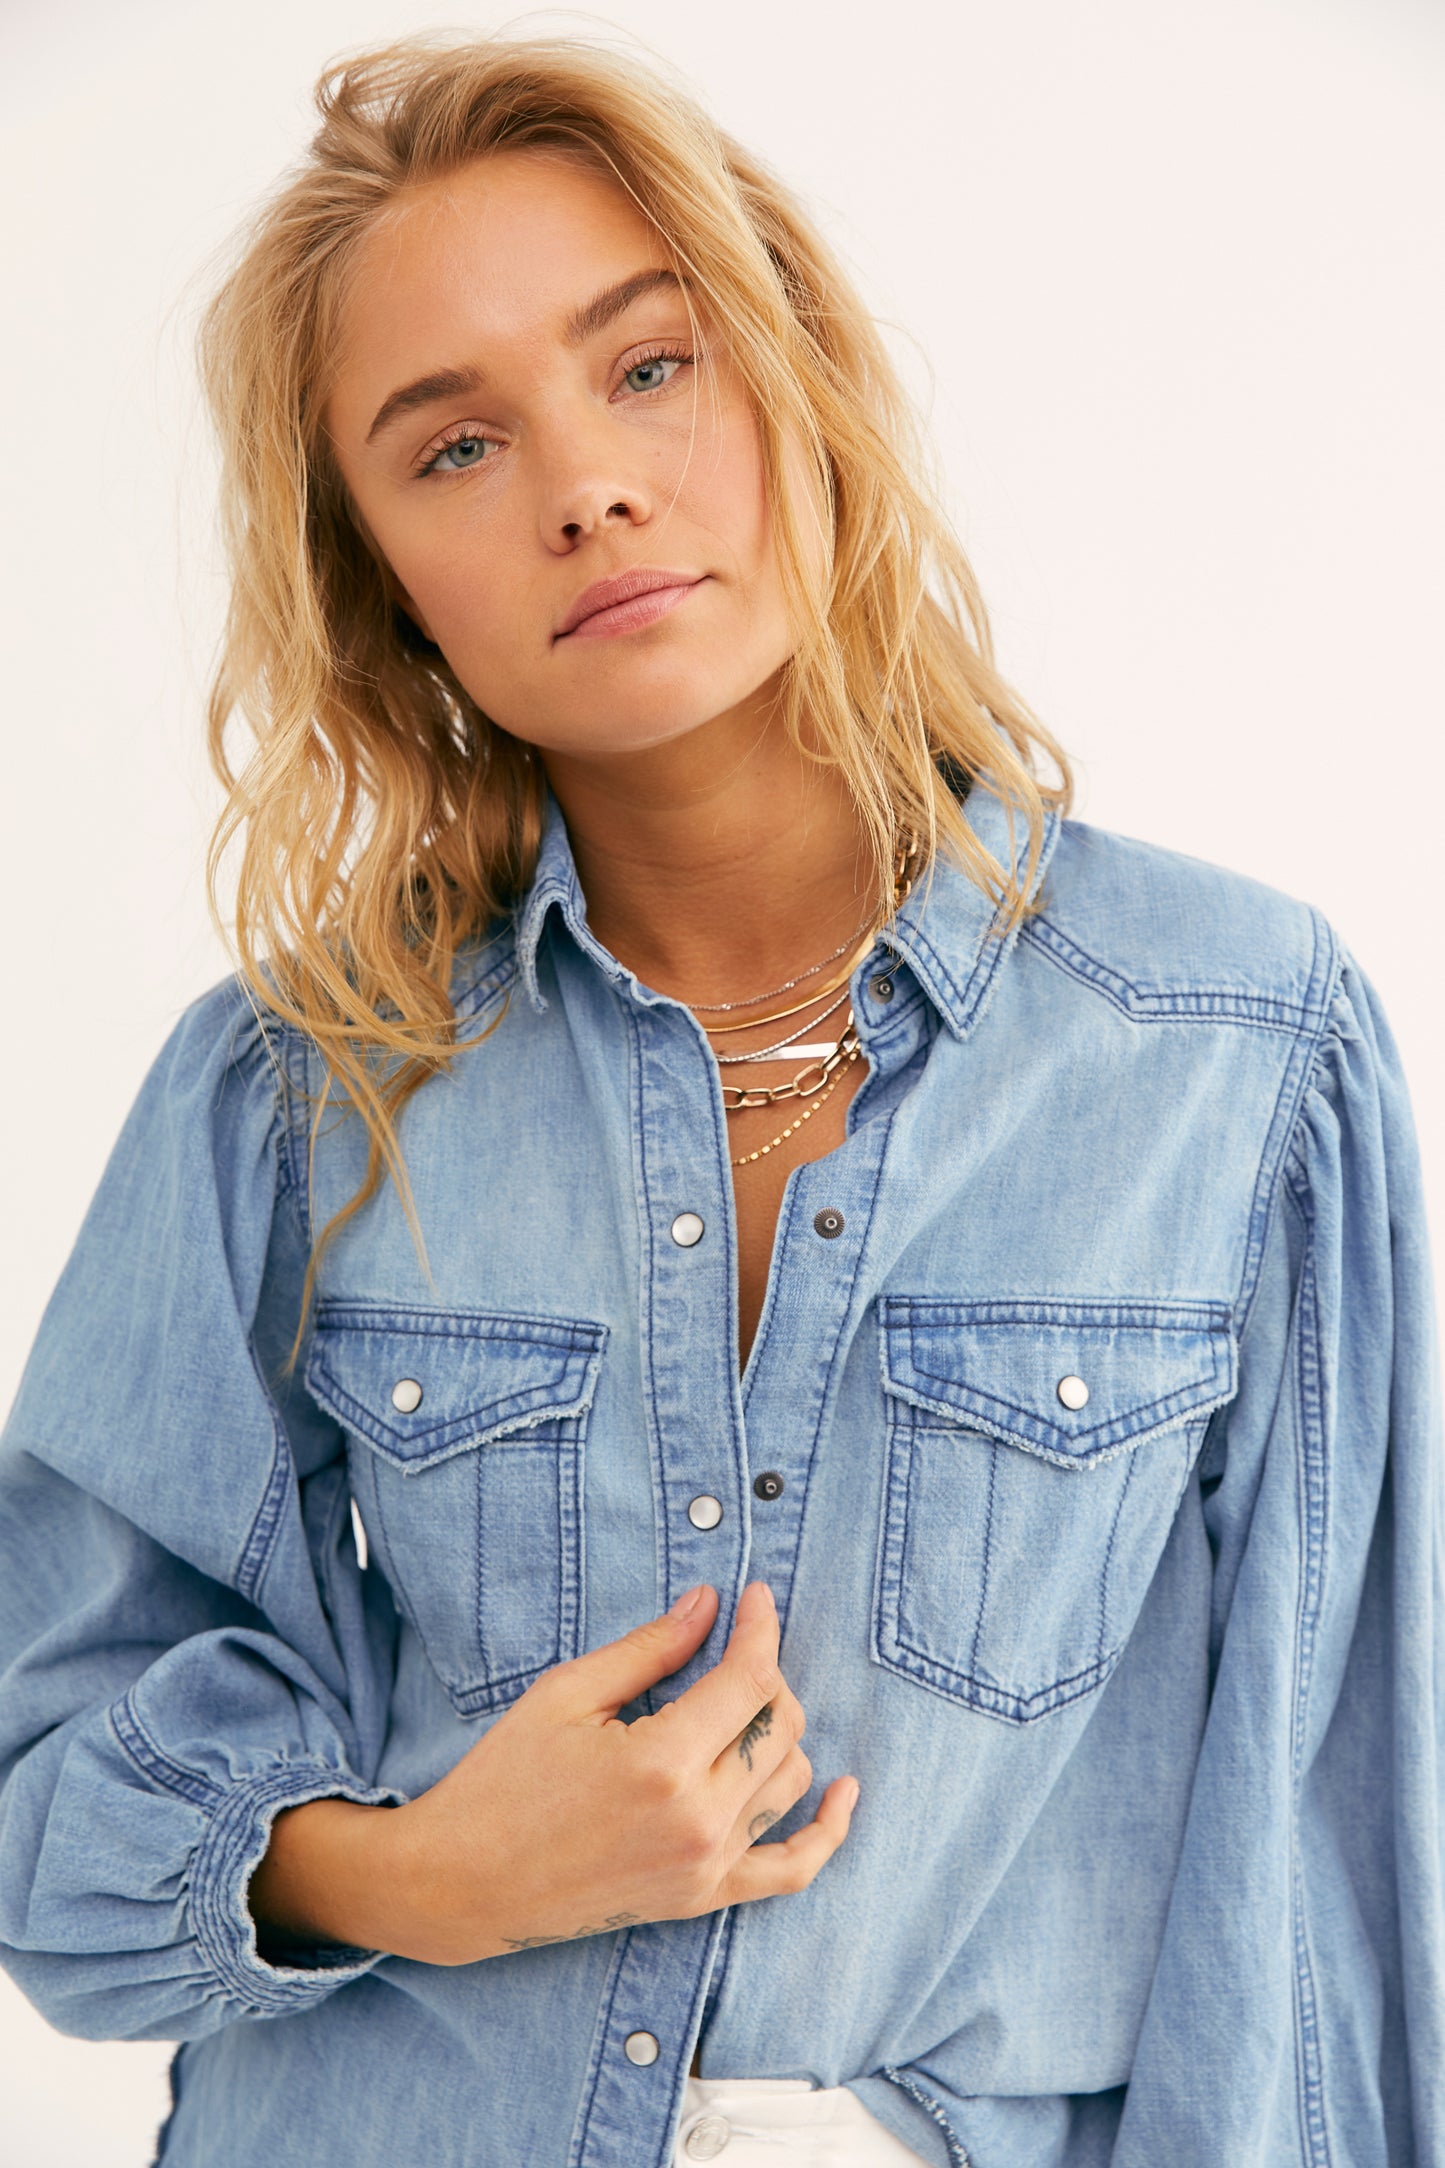 With Love Denim Top